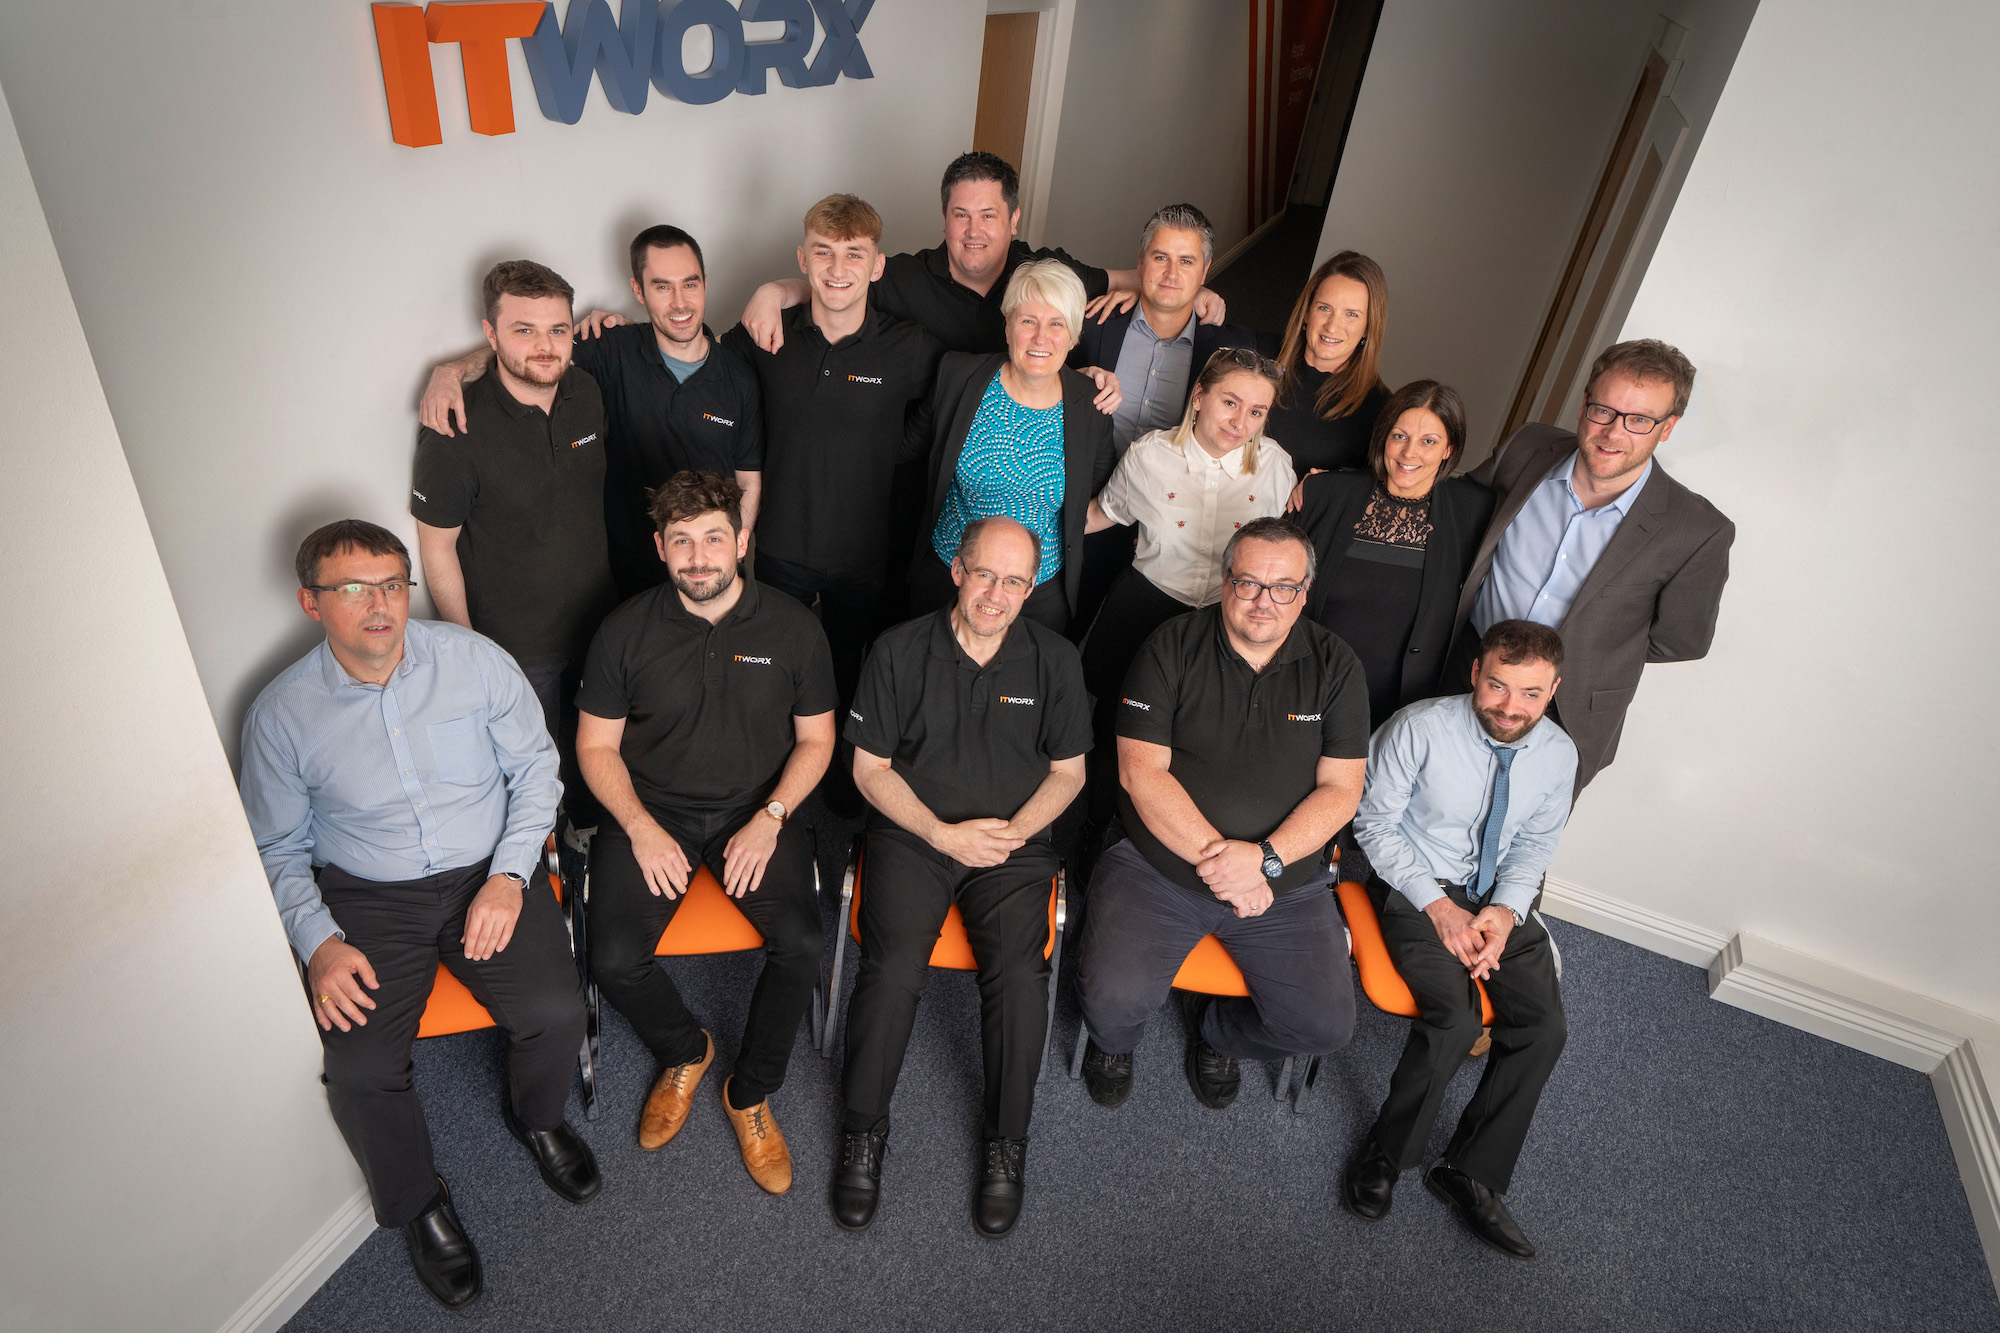 Employee-owned ITWORX achieves record £4.6m turnover